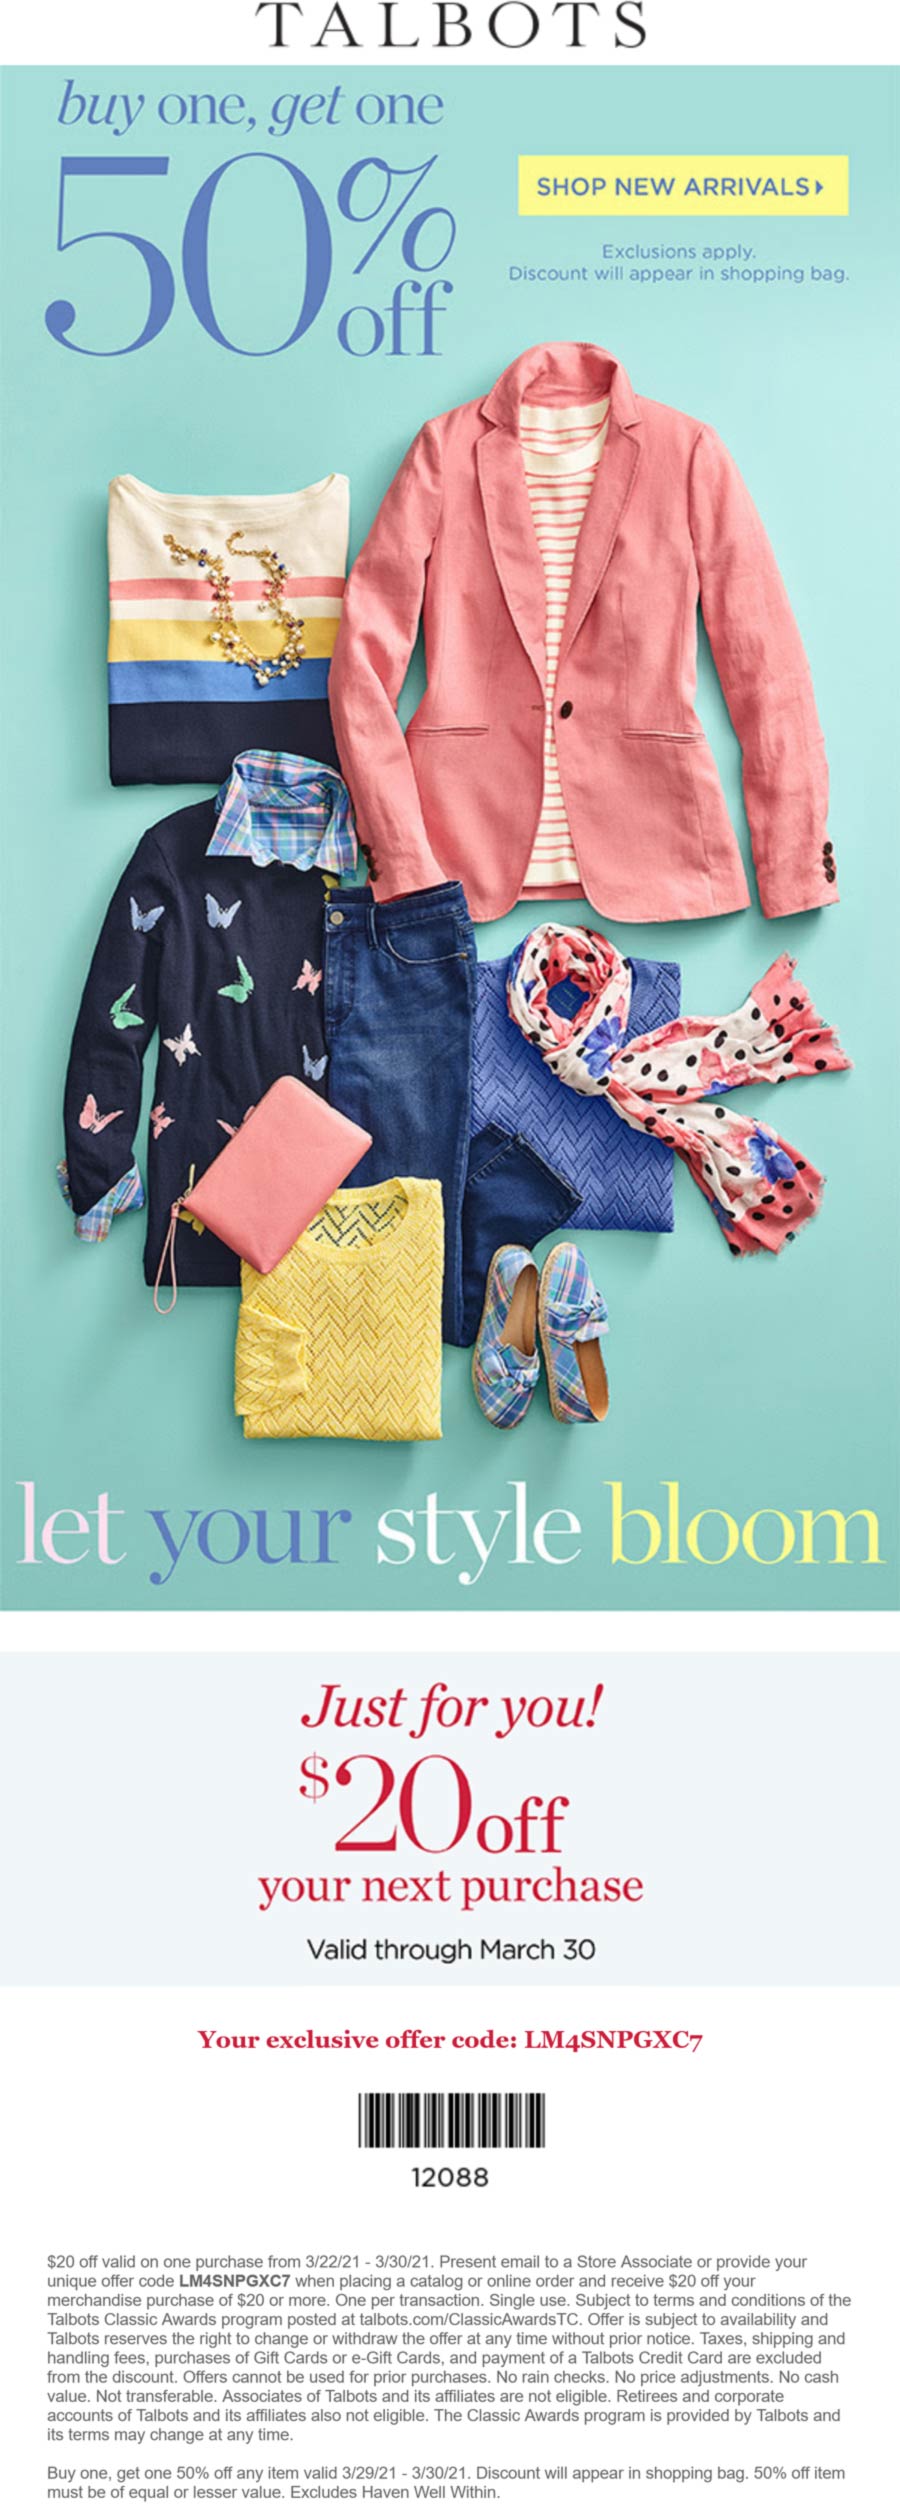 Talbots stores Coupon  Second item 50% off at Talbots via promo code LM4SNPGXC7 #talbots 